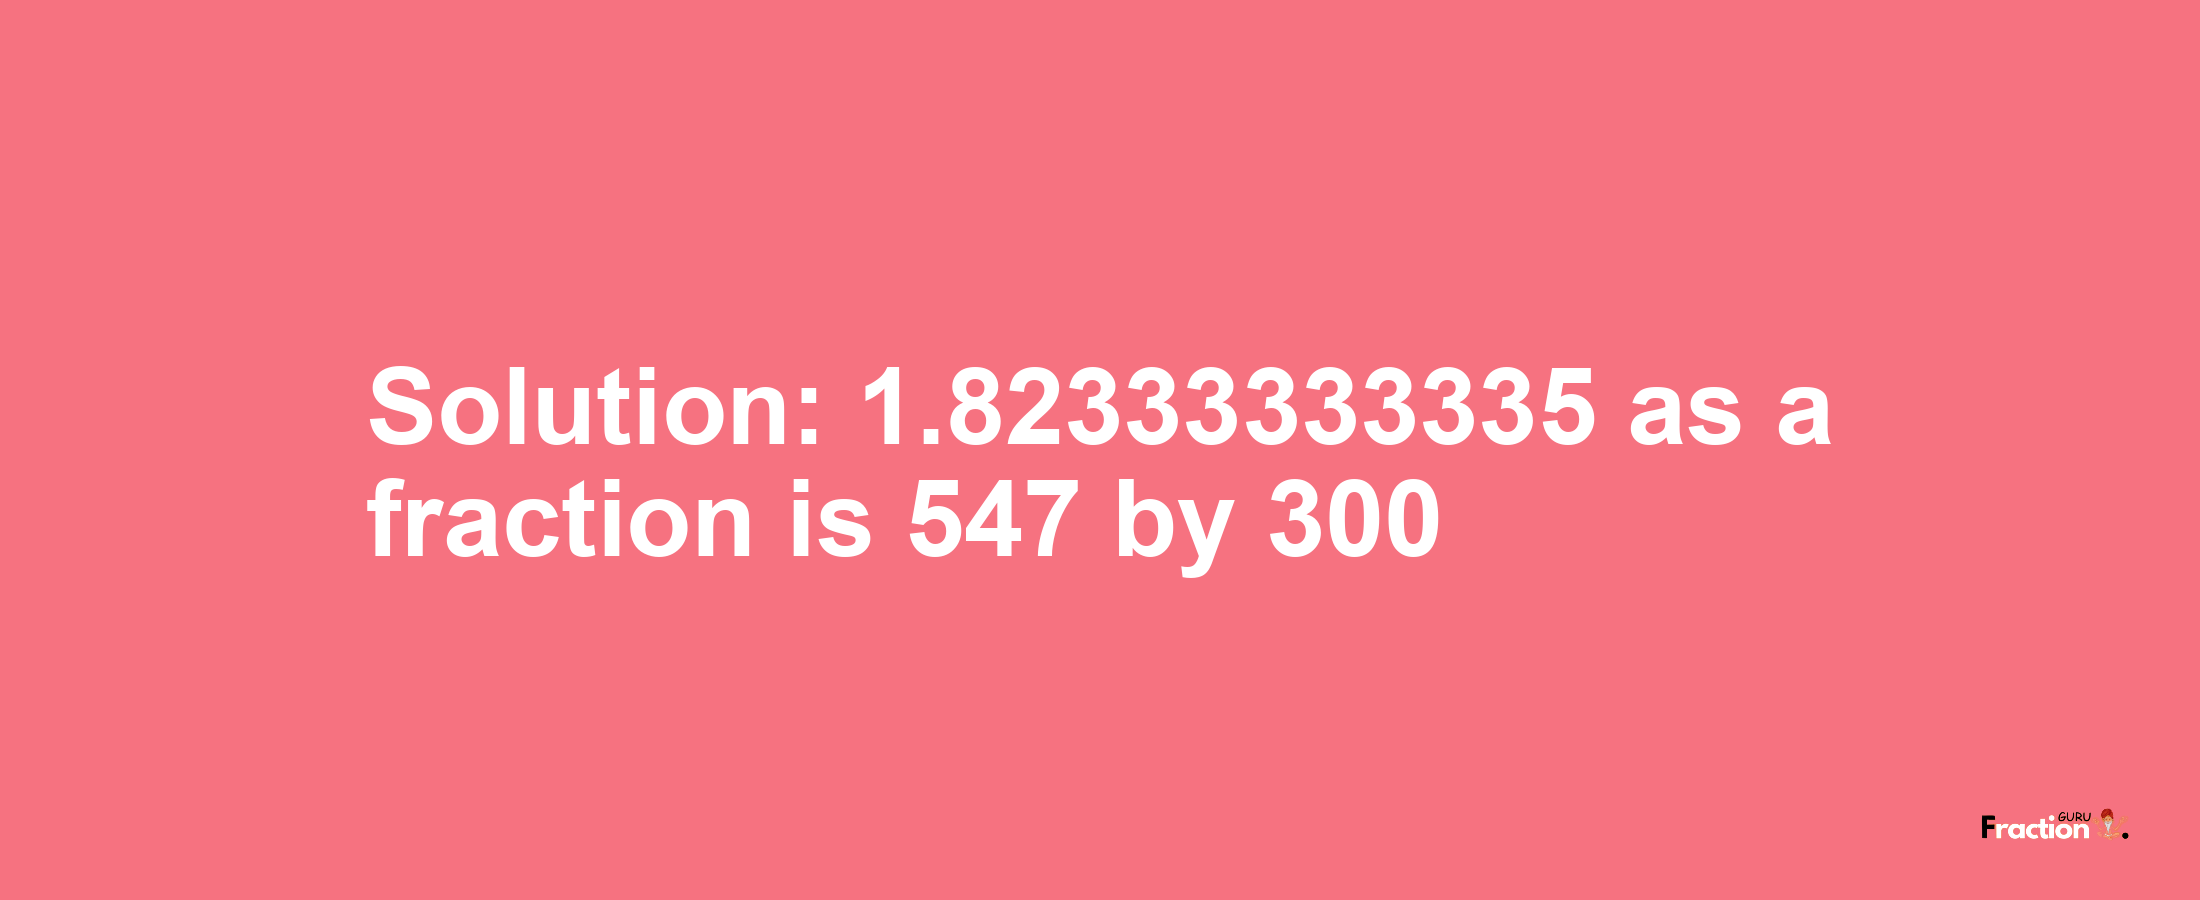 Solution:1.82333333335 as a fraction is 547/300